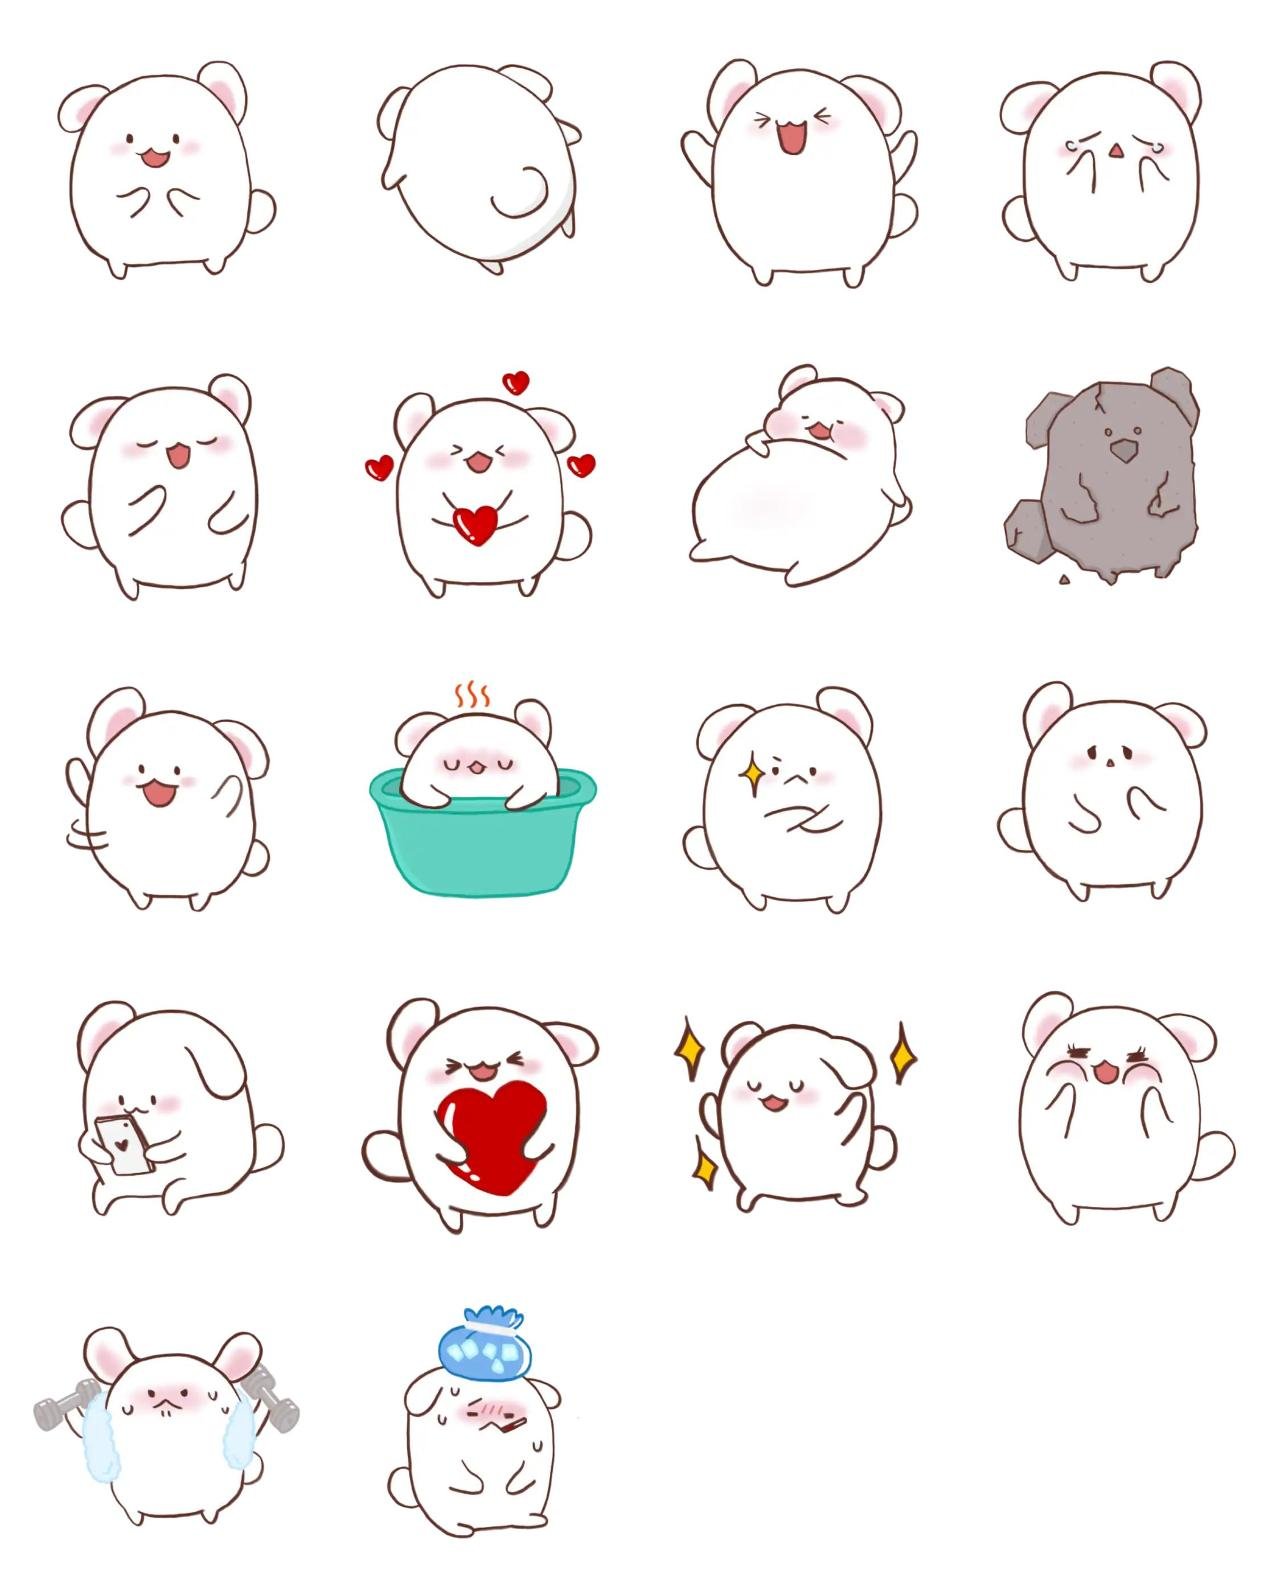 Koko Animation/Cartoon,Animals sticker pack for Whatsapp, Telegram, Signal, and others chatting and message apps